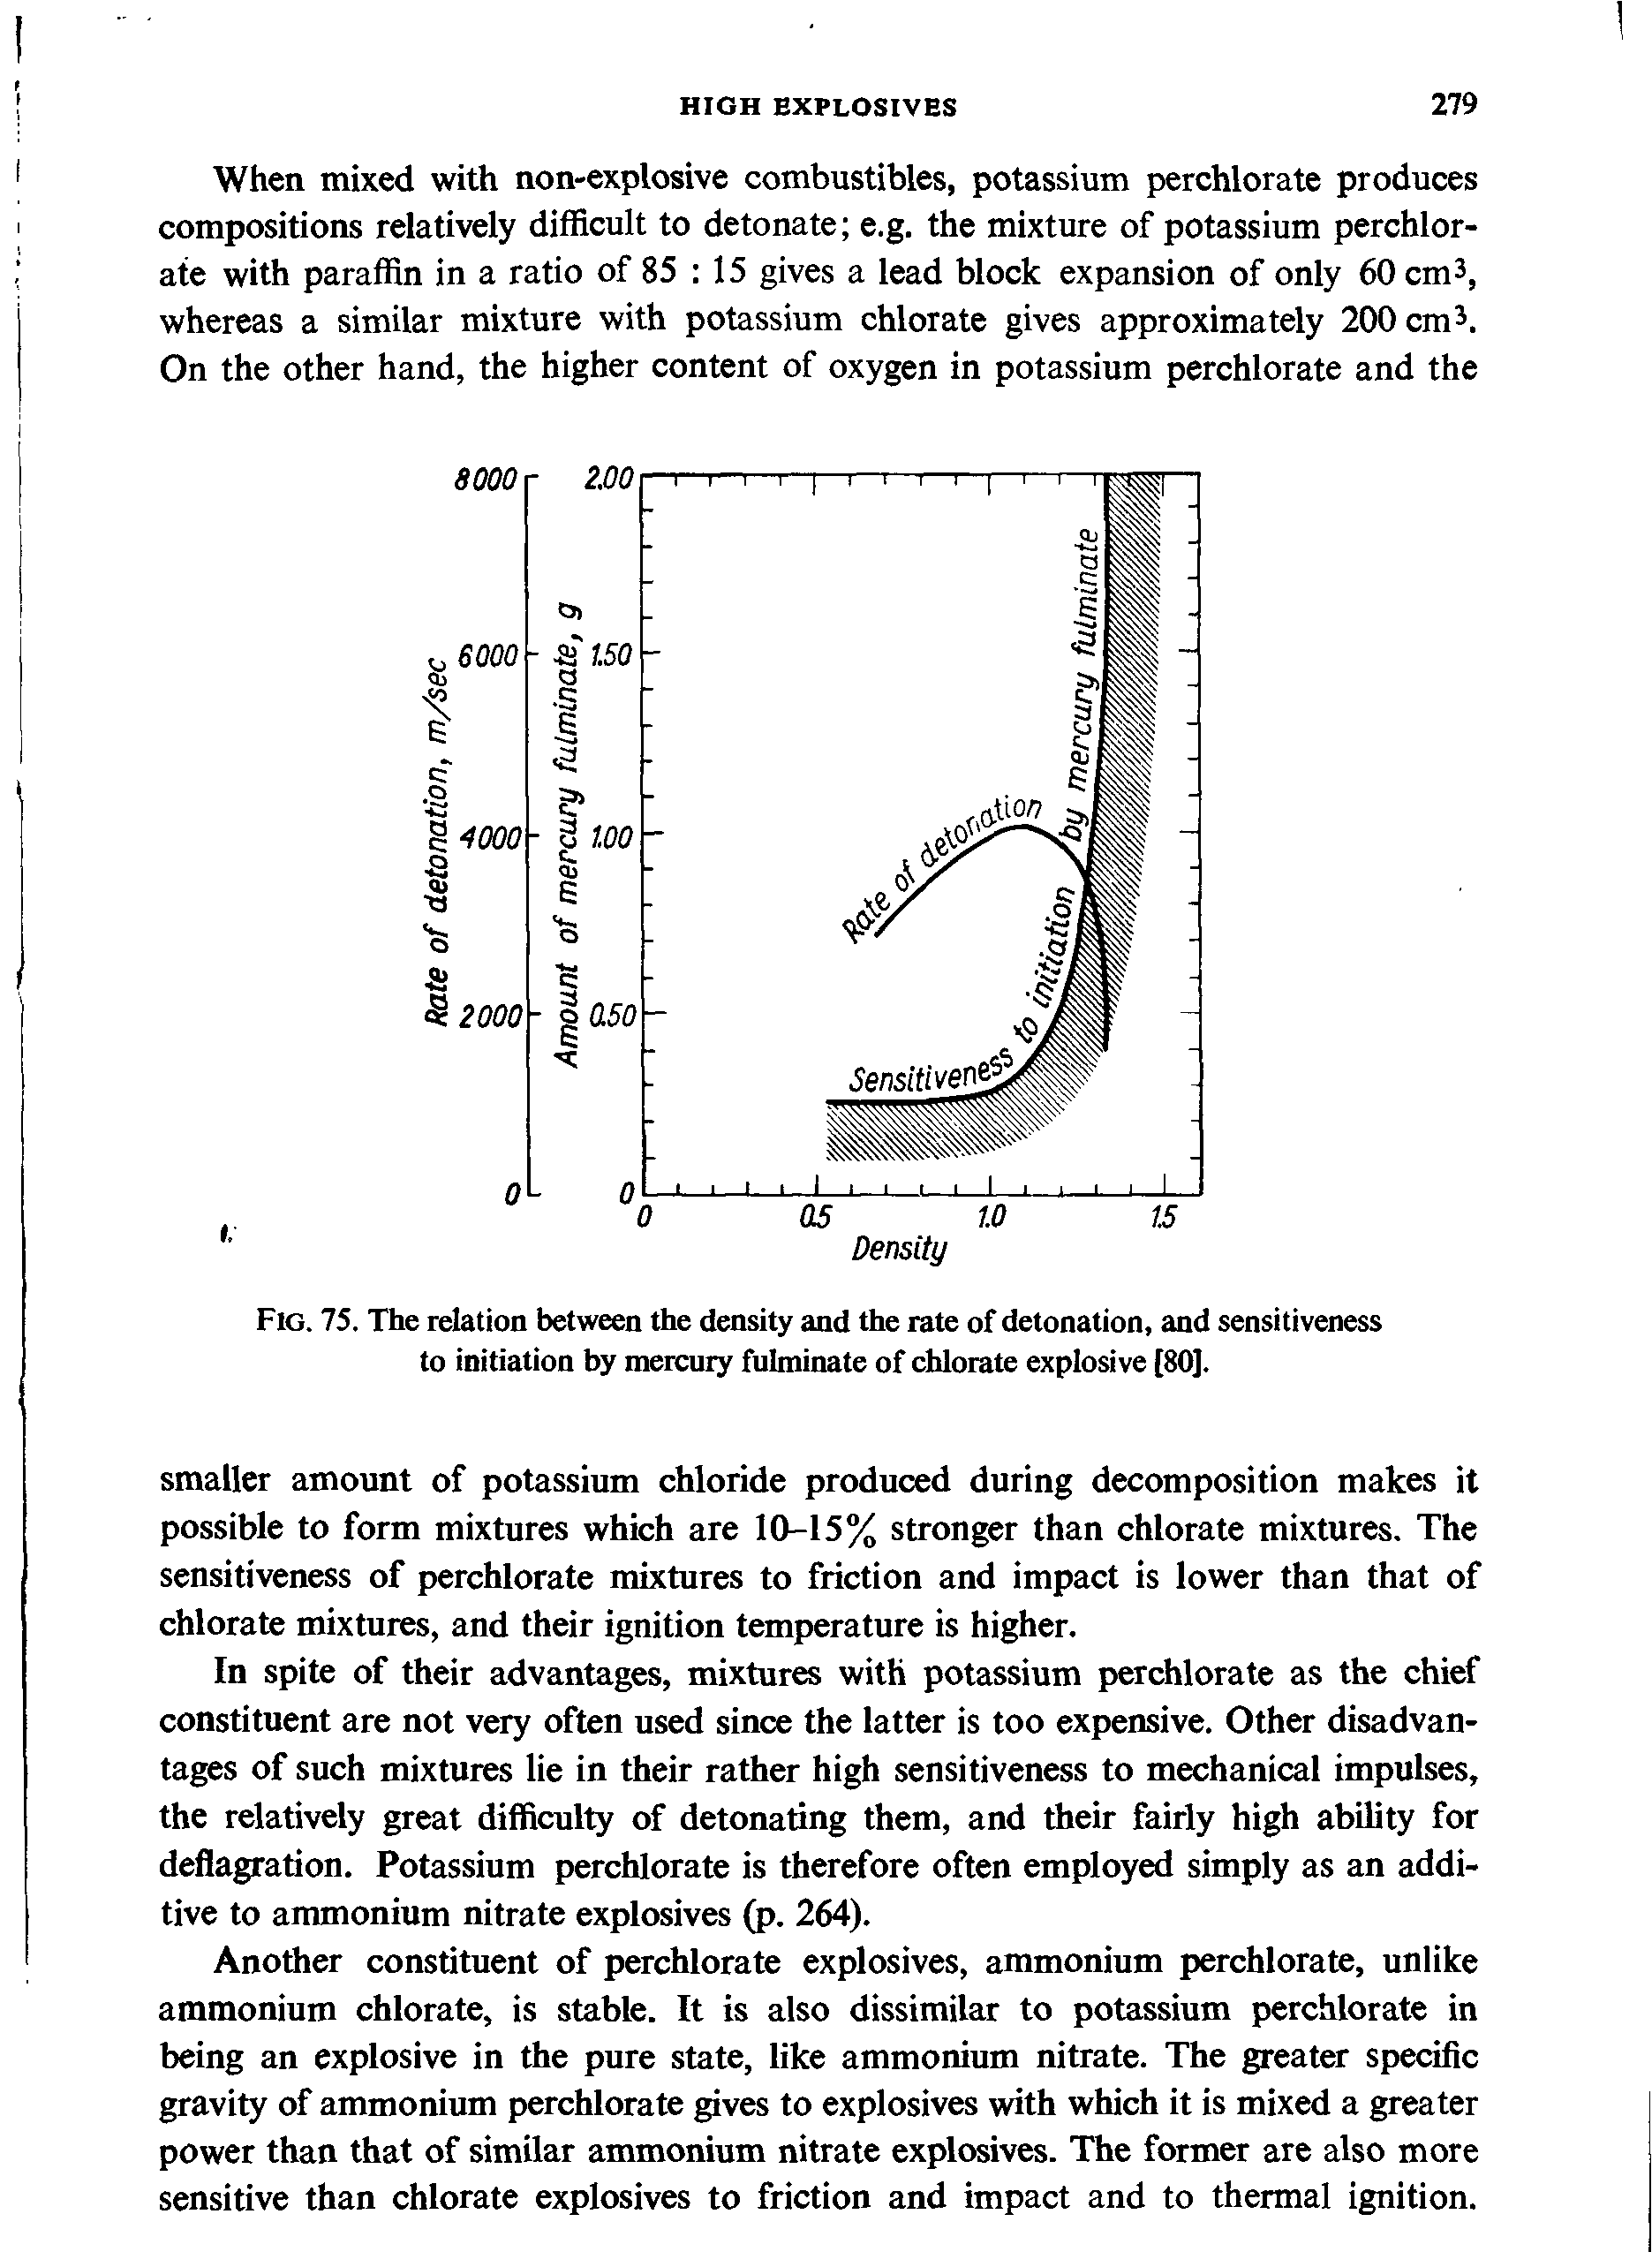 Fig. 75. The relation between the density and the rate of detonation, and sensitiveness to initiation by mercury fulminate of chlorate explosive [80].